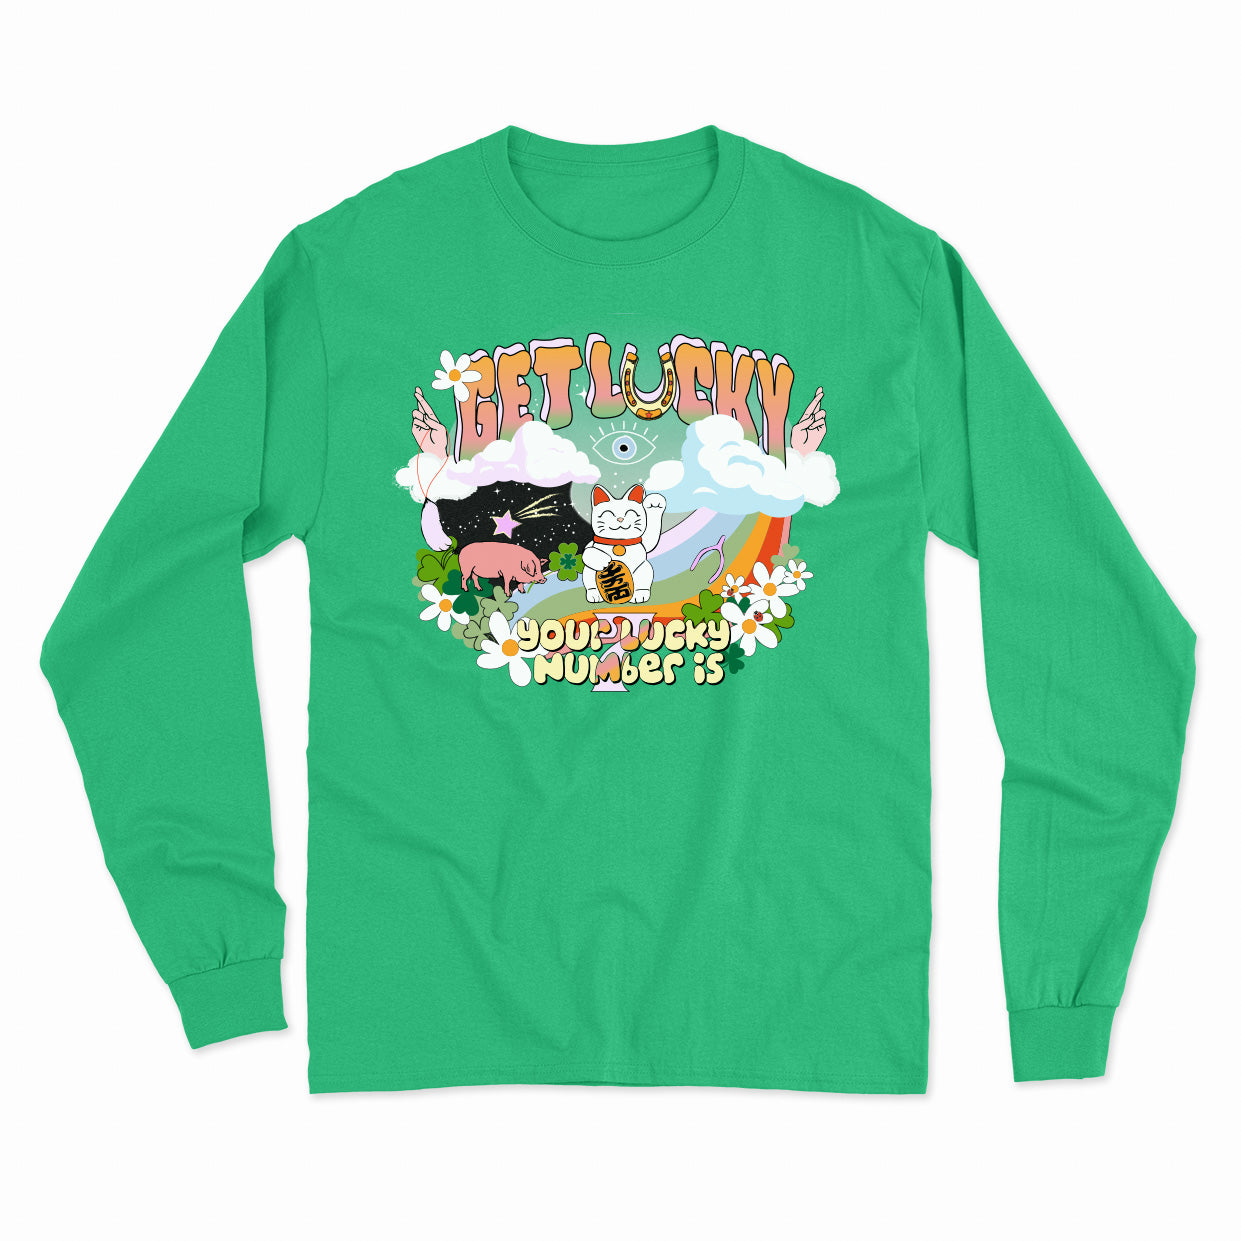 GET LUCKY longsleeve vintage unisexe - tamelo boutique